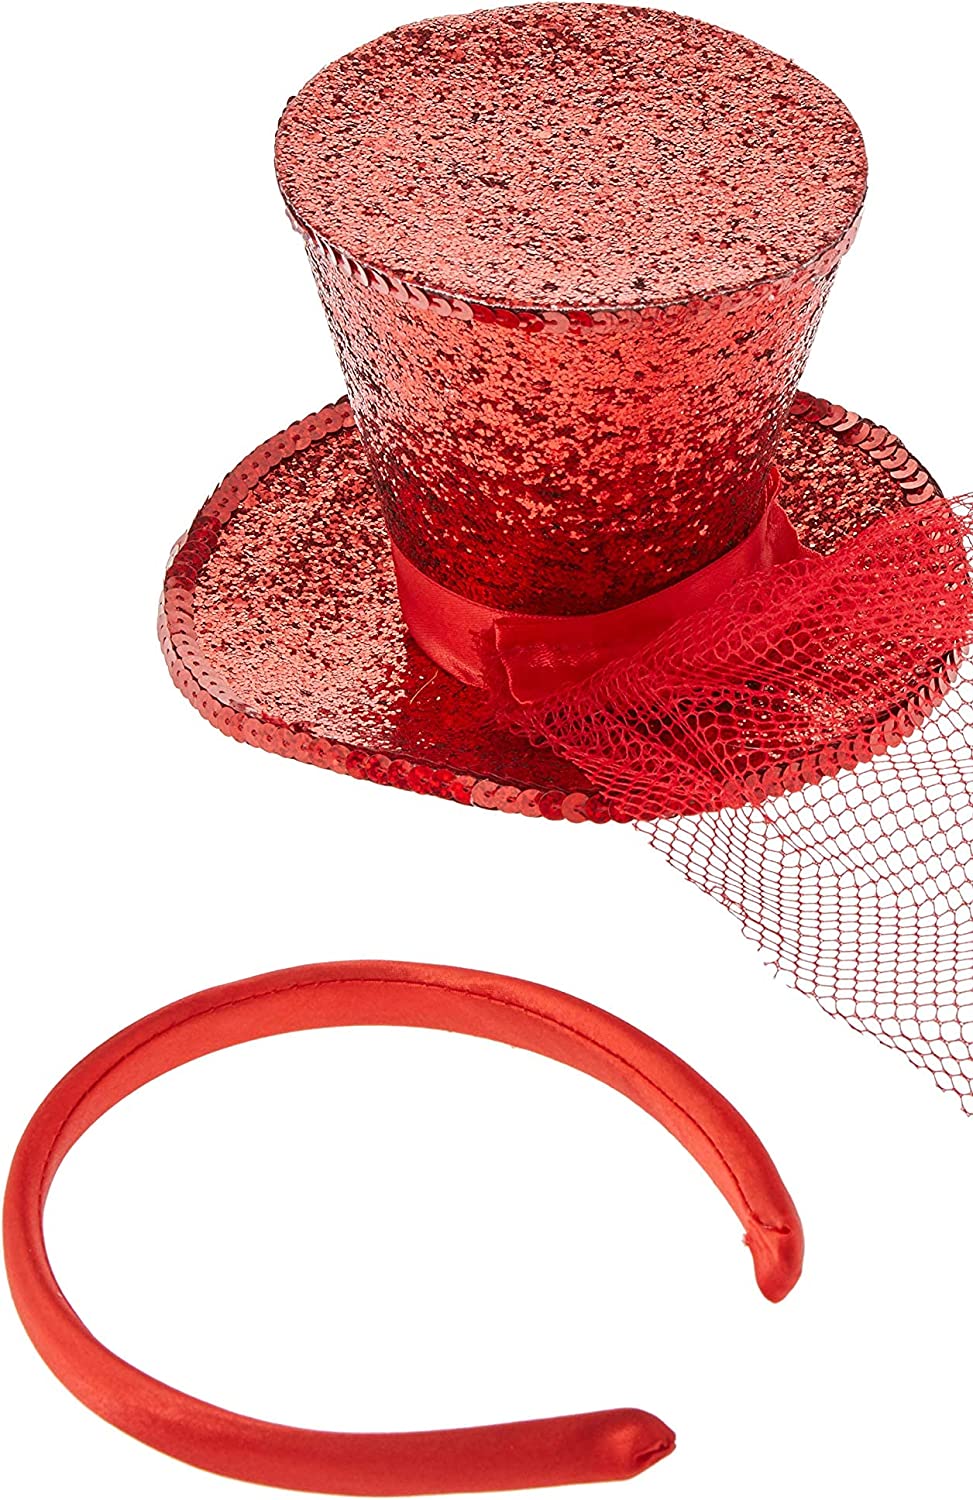 Fever Mini Top Hat on Headband - Red